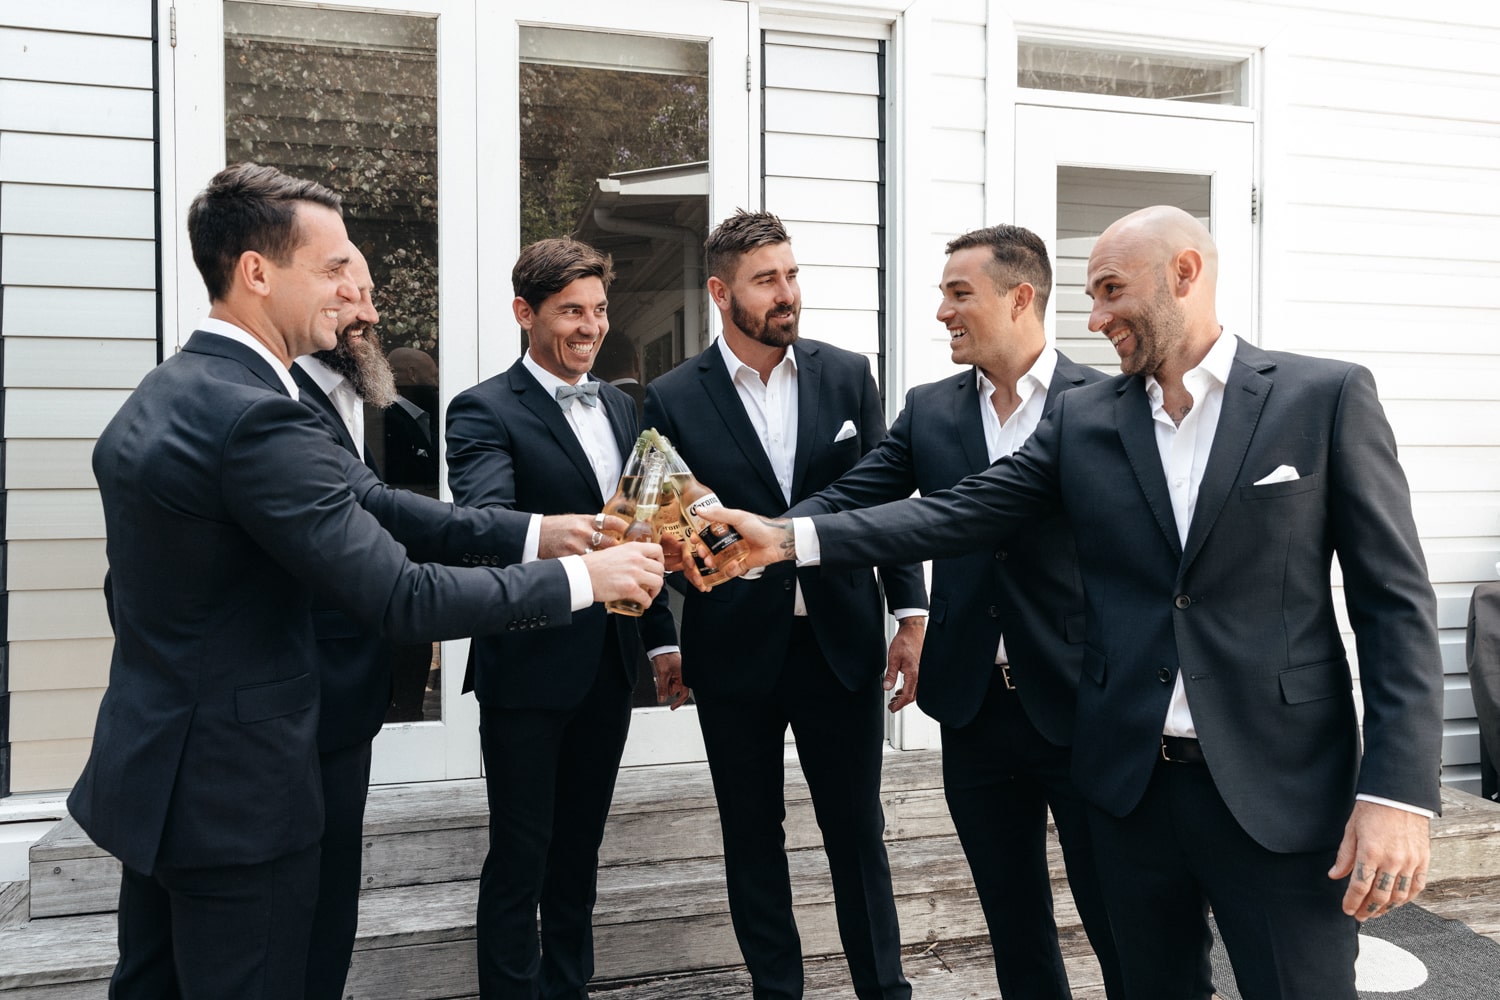 the guys going for a cheers - palm beach wedding